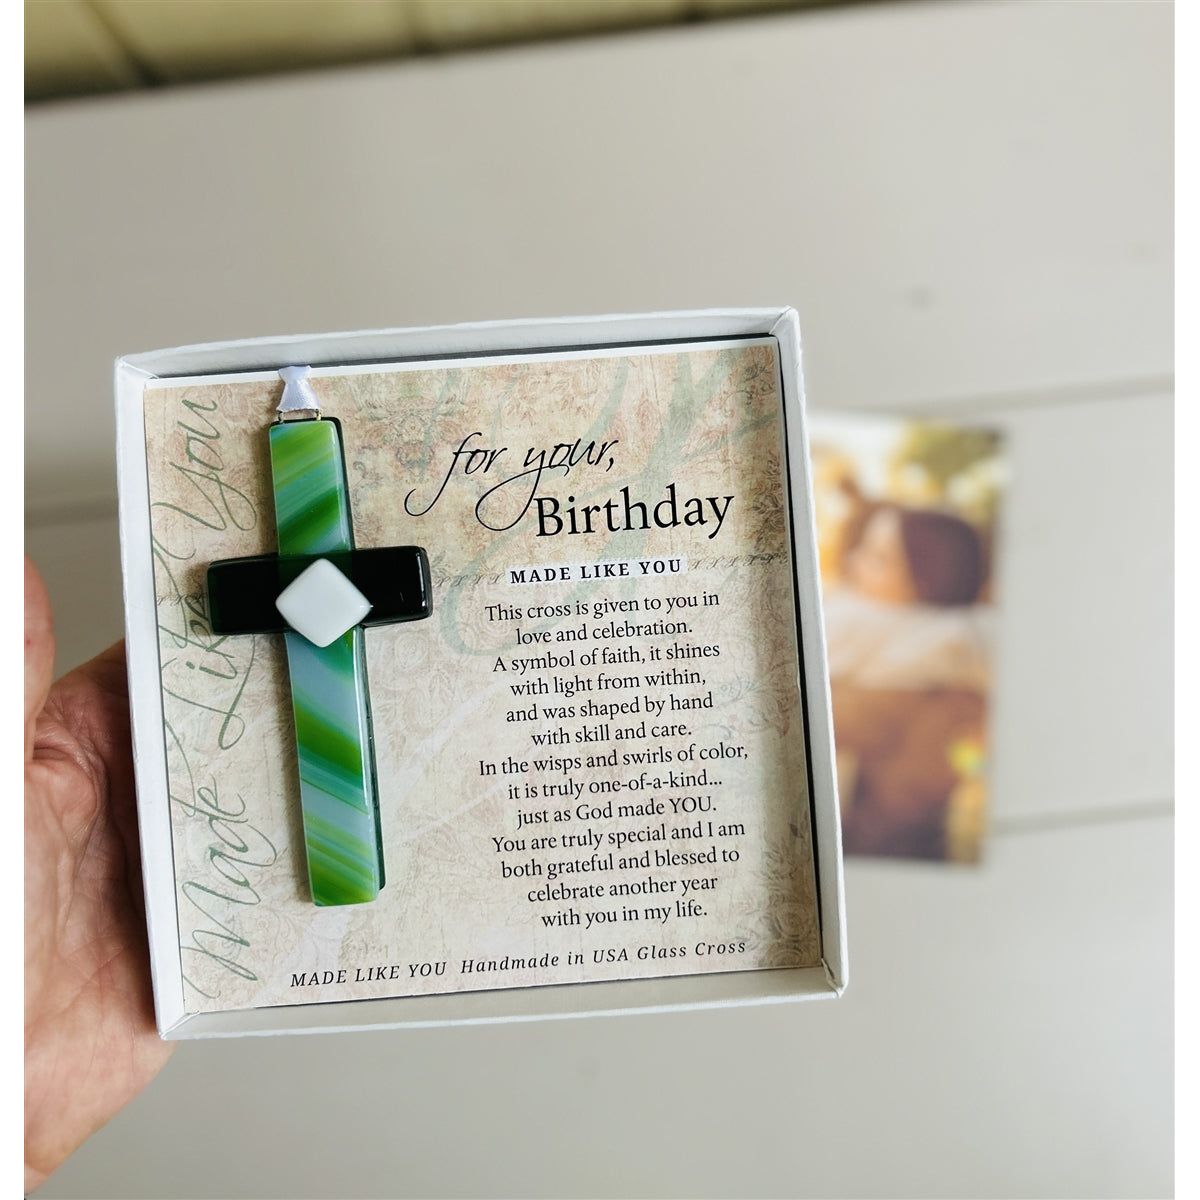 &quot;For Your, Birthday&quot; cross with a photo of friends hugging in background.